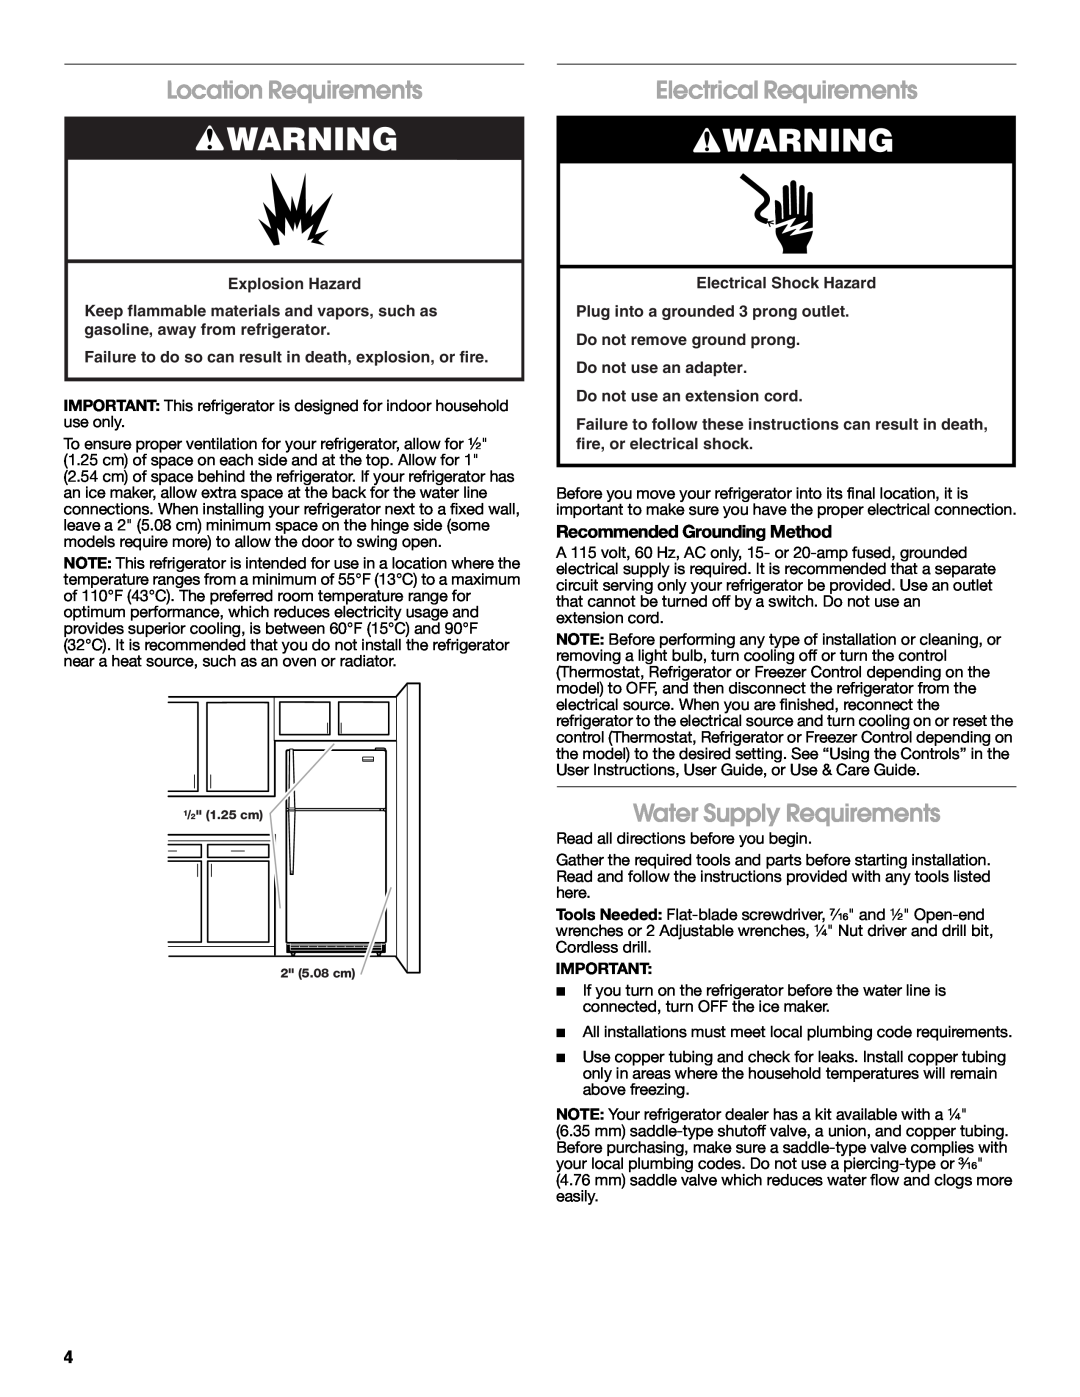 Whirlpool W10726840A installation instructions Location Requirements, Electrical Requirements, Water Supply Requirements 